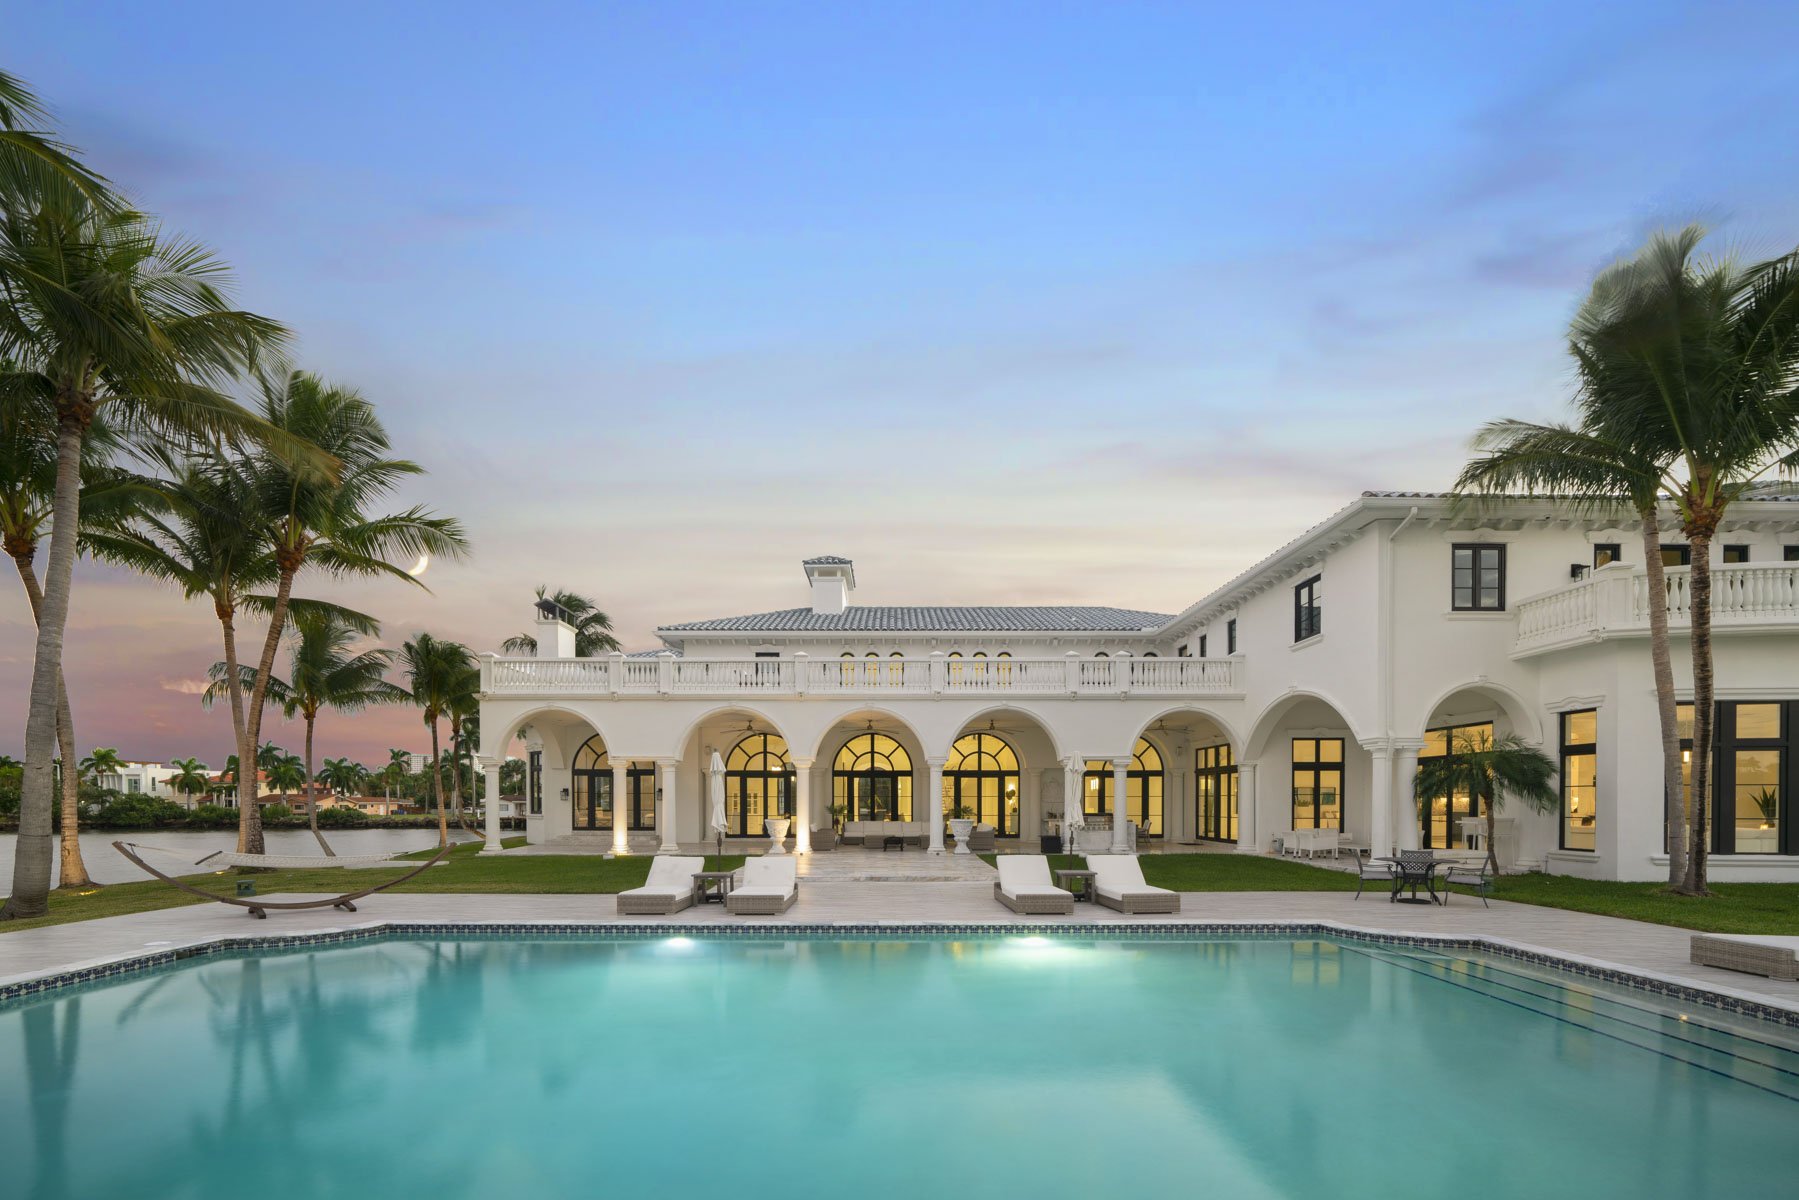 Master Brokers Forum: Check Out This Hollywood Waterfront Estate Asking $16.5 Million 43.jpg